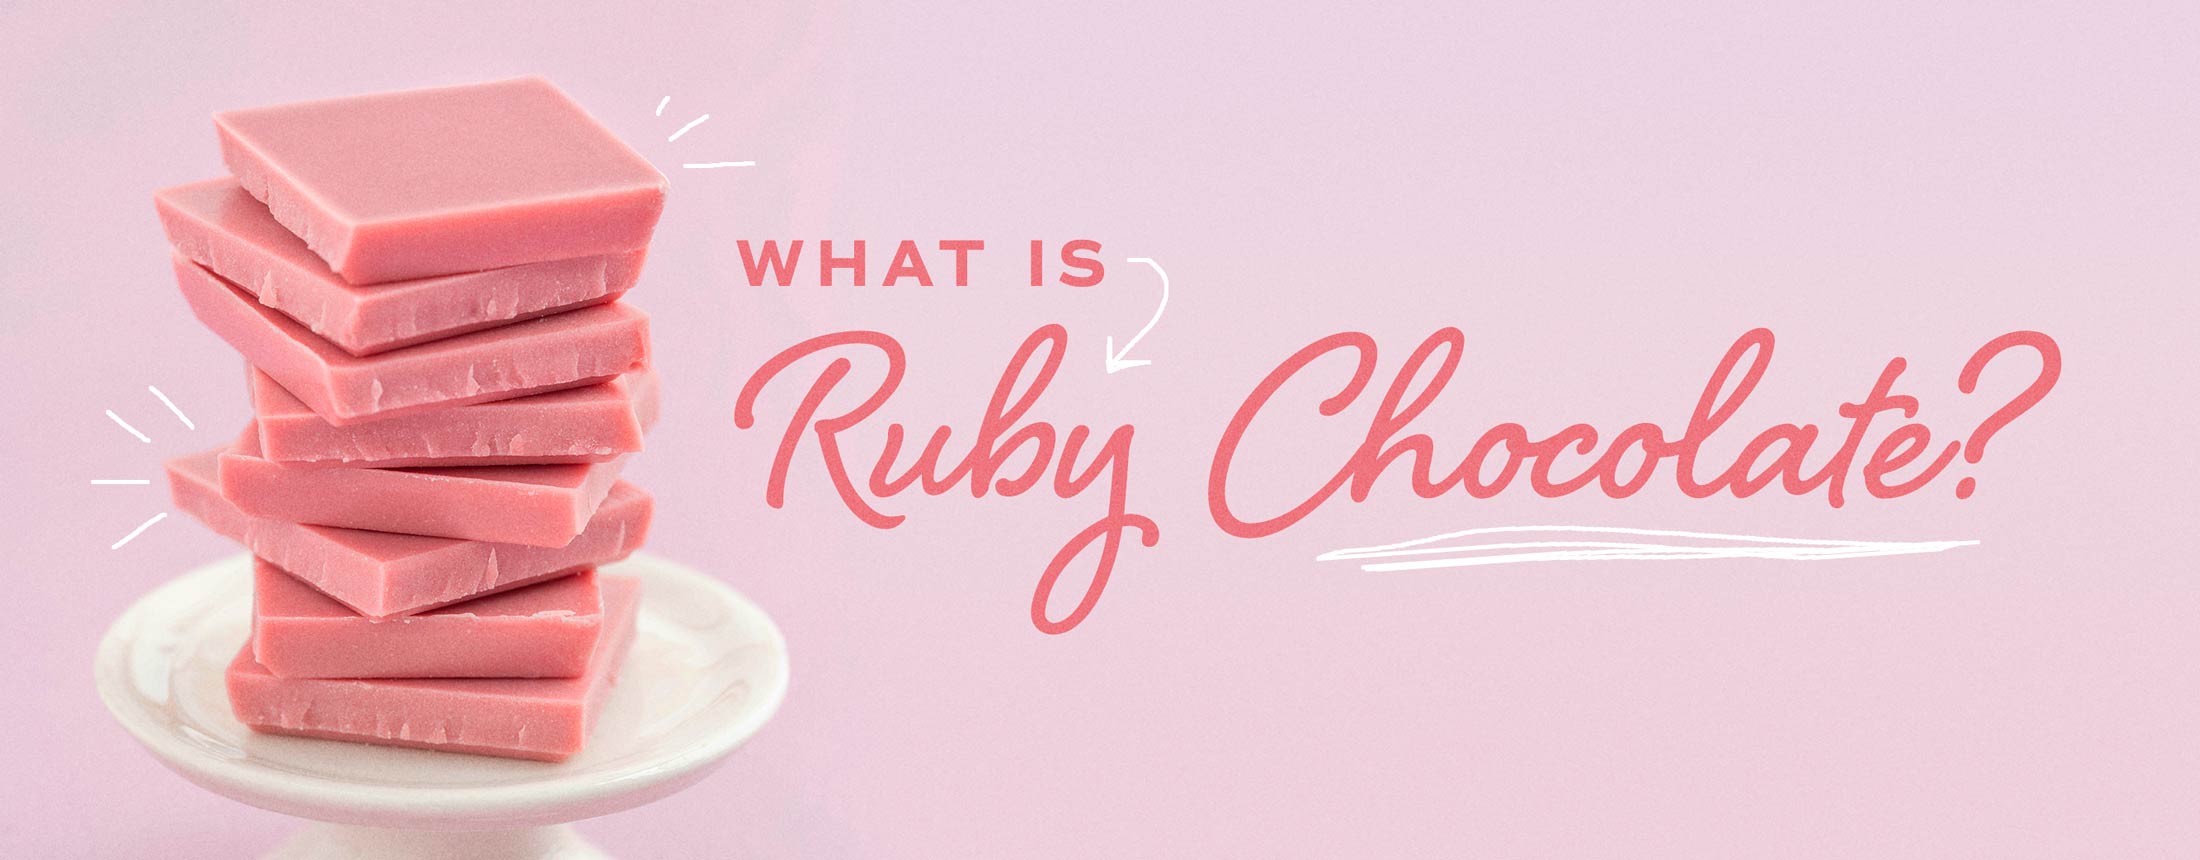 What Is Ruby Chocolate?